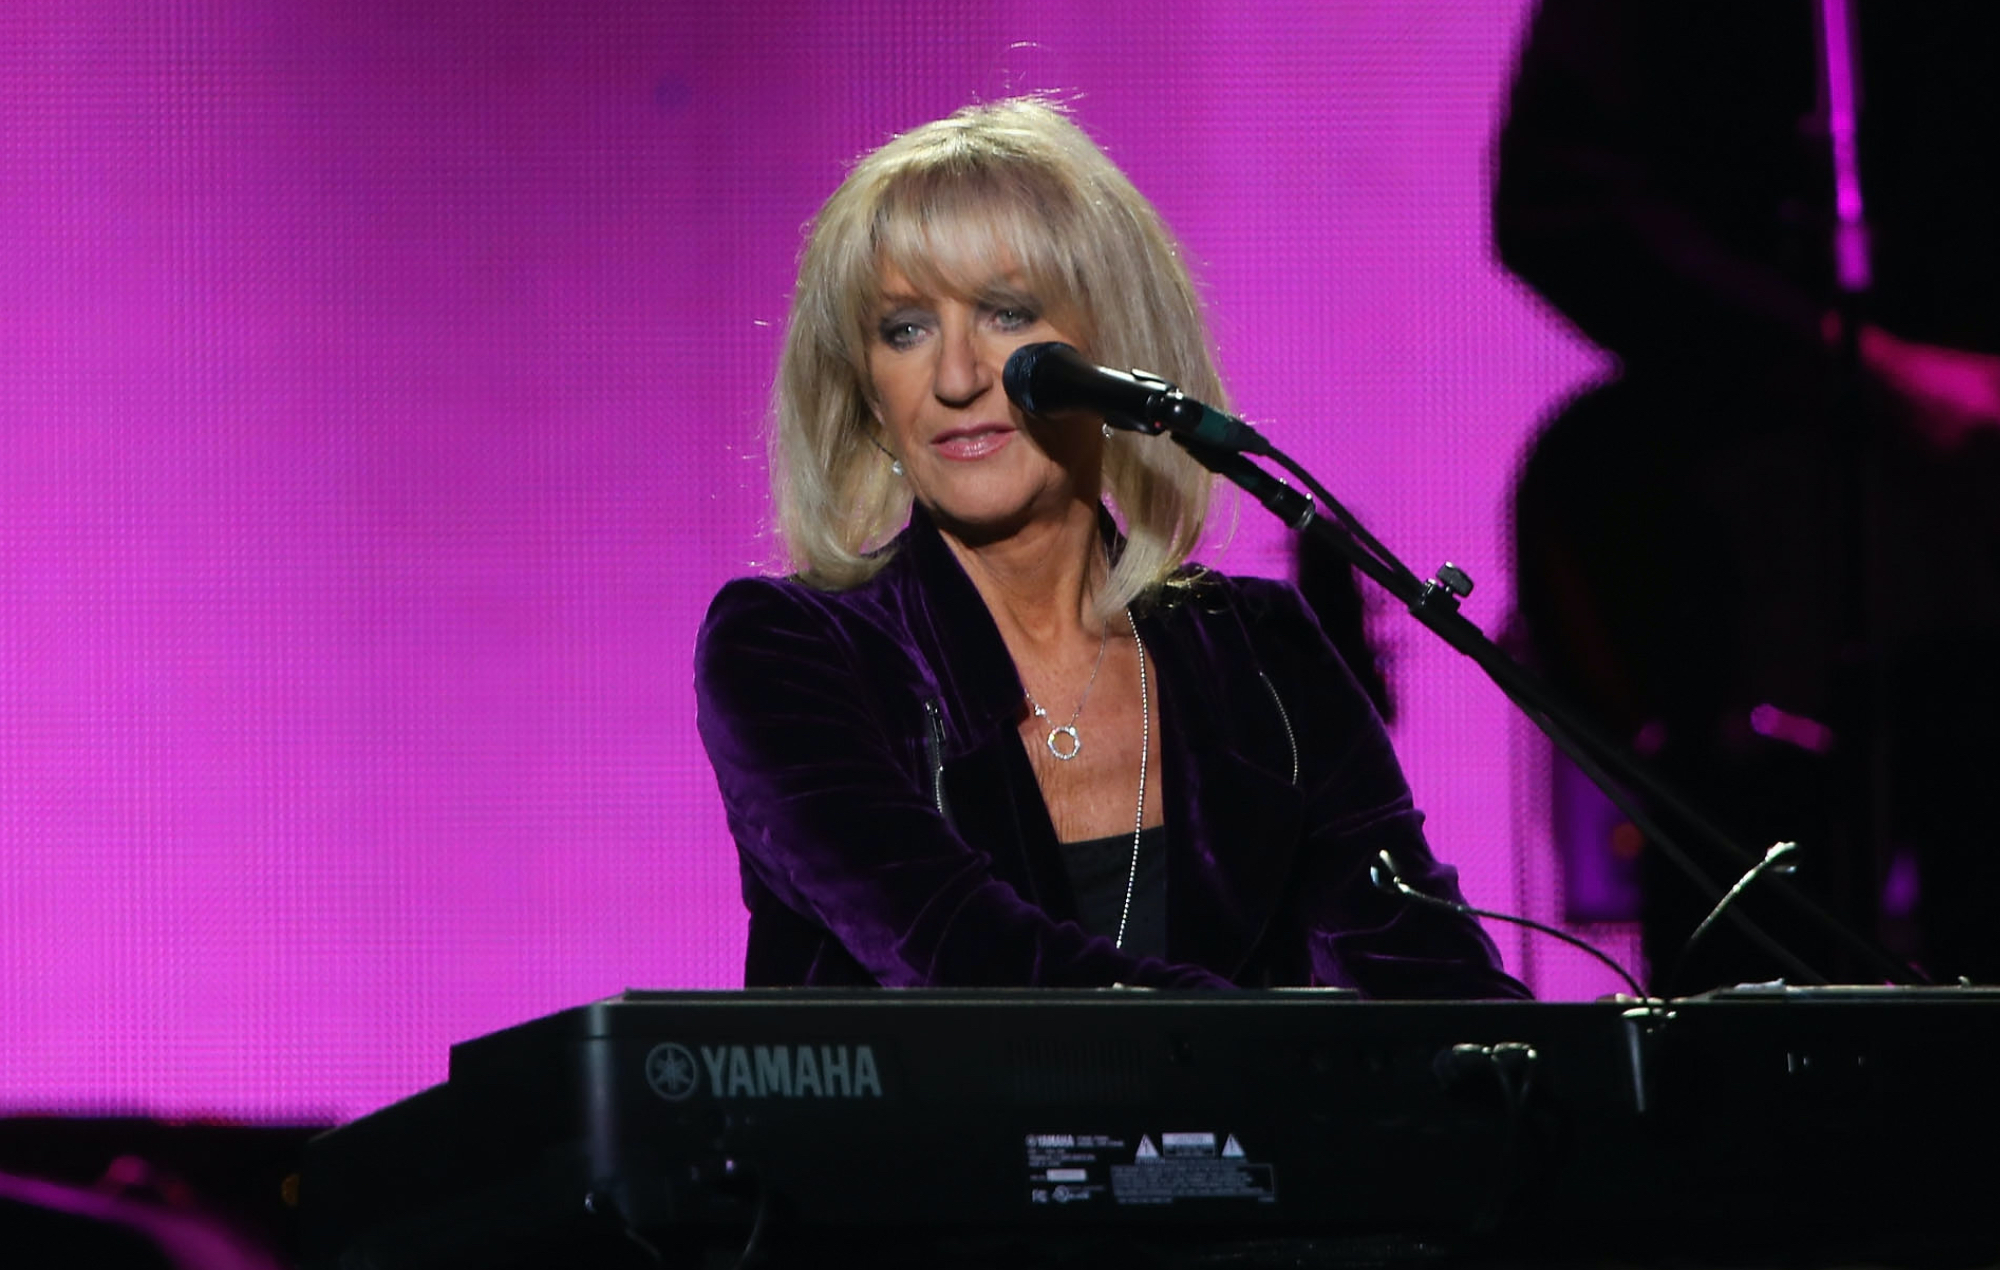 Christine McVie performing live on stage with Fleetwood Mac in 2015